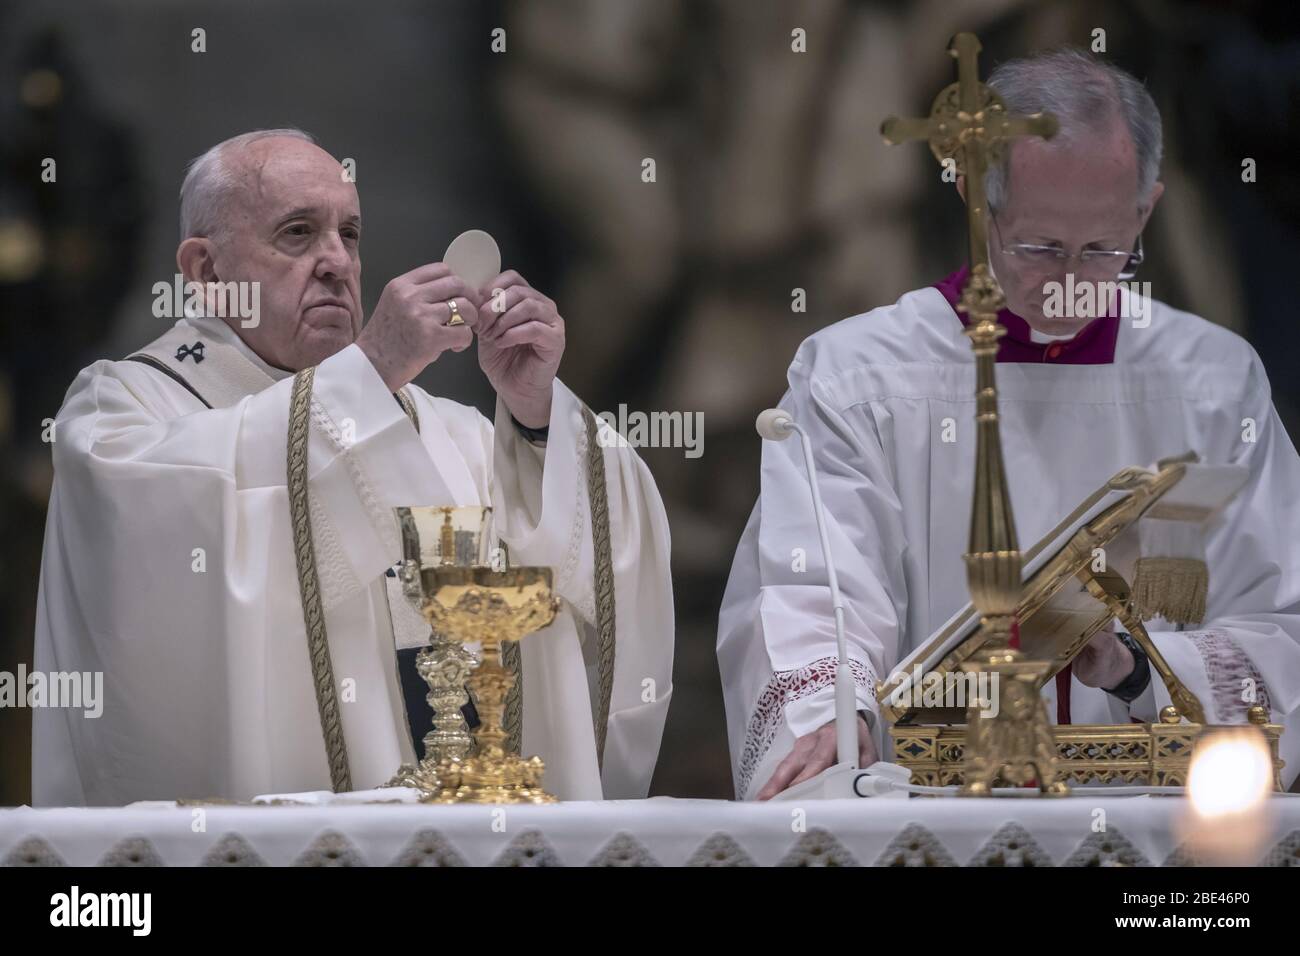 Vatican, Vatican City. 11th Apr, 2020. Pope Francis presides over Easter's Holy Saturday Vigil held behind closed doors at St. Peter's Basilica in the Vatican on Saturday, April 11, 2020, during the lockdown aimed at curbing the spread of the COVID-19 infection. Pool Photos by Possolo/Spaziani/UPI Credit: UPI/Alamy Live News Stock Photo